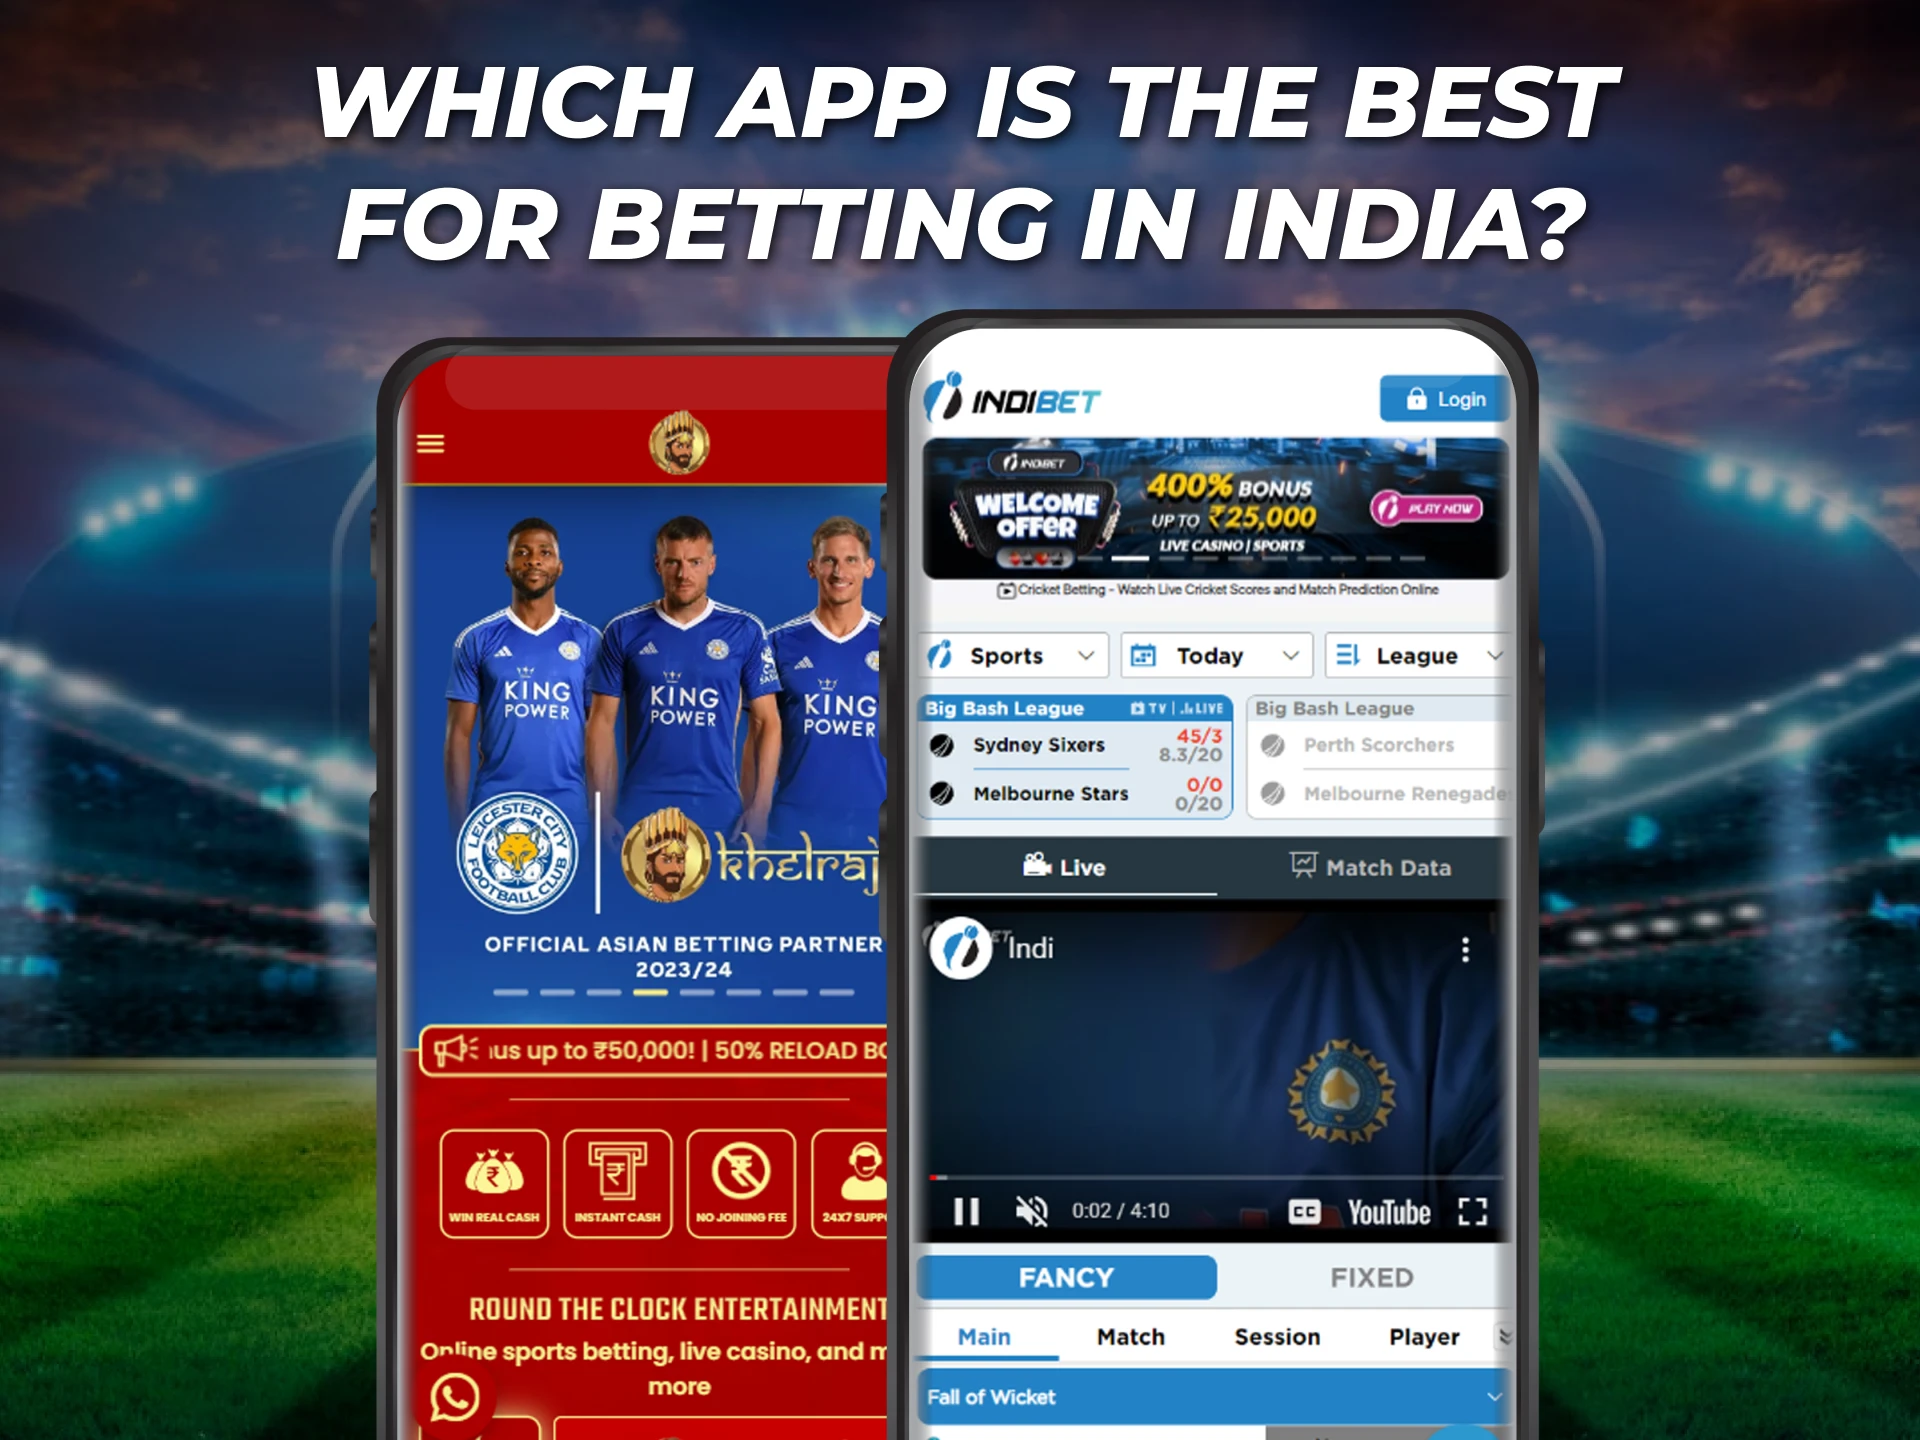 Find out which app is best for betting in India.